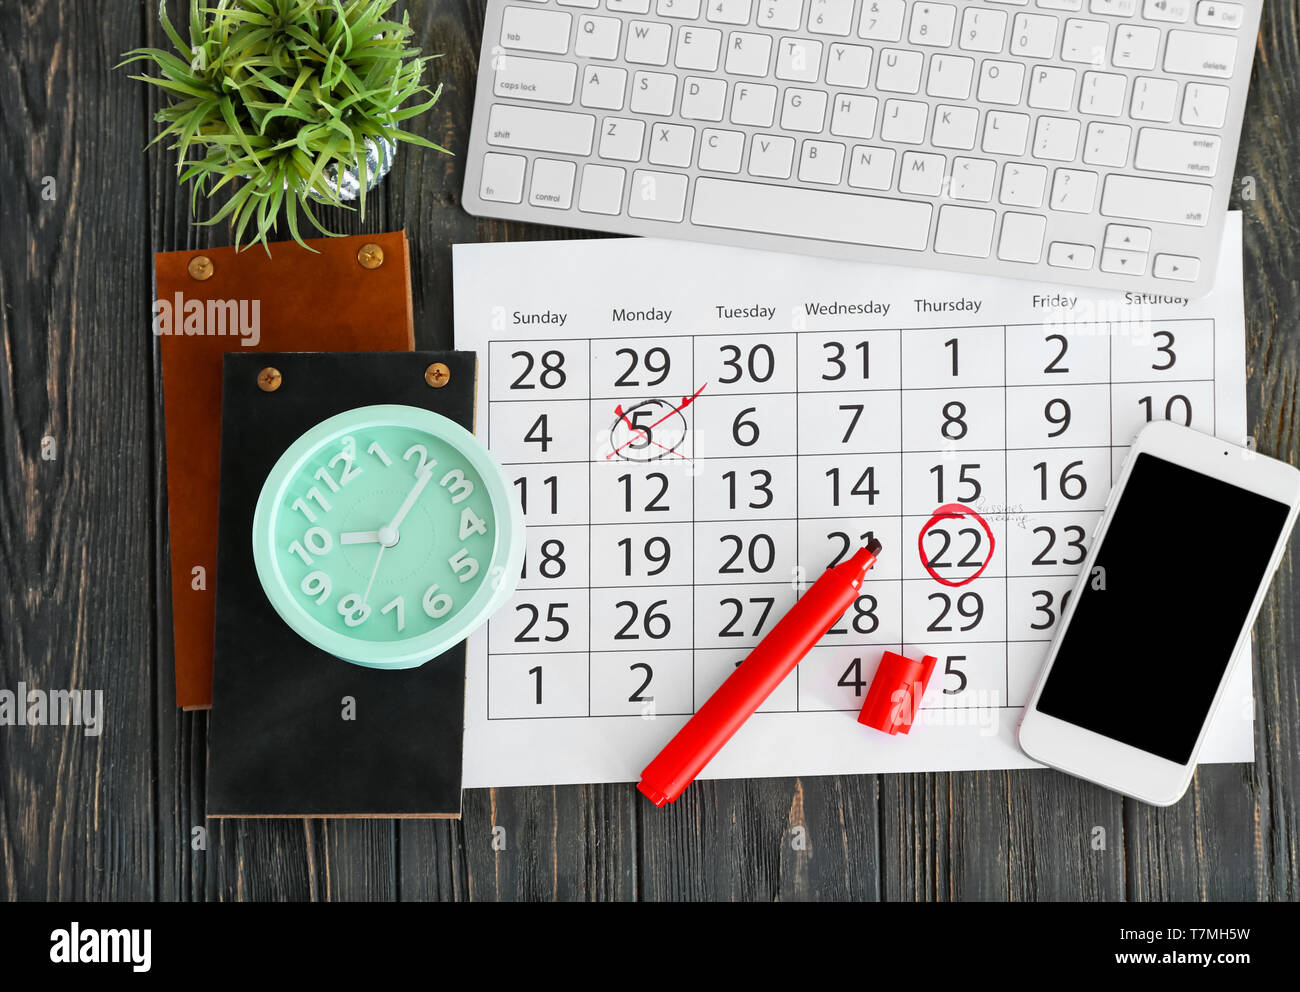 Composition Of Calendar With Notes Computer Keyboard And Clock On Wooden Background Stock Photo Alamy